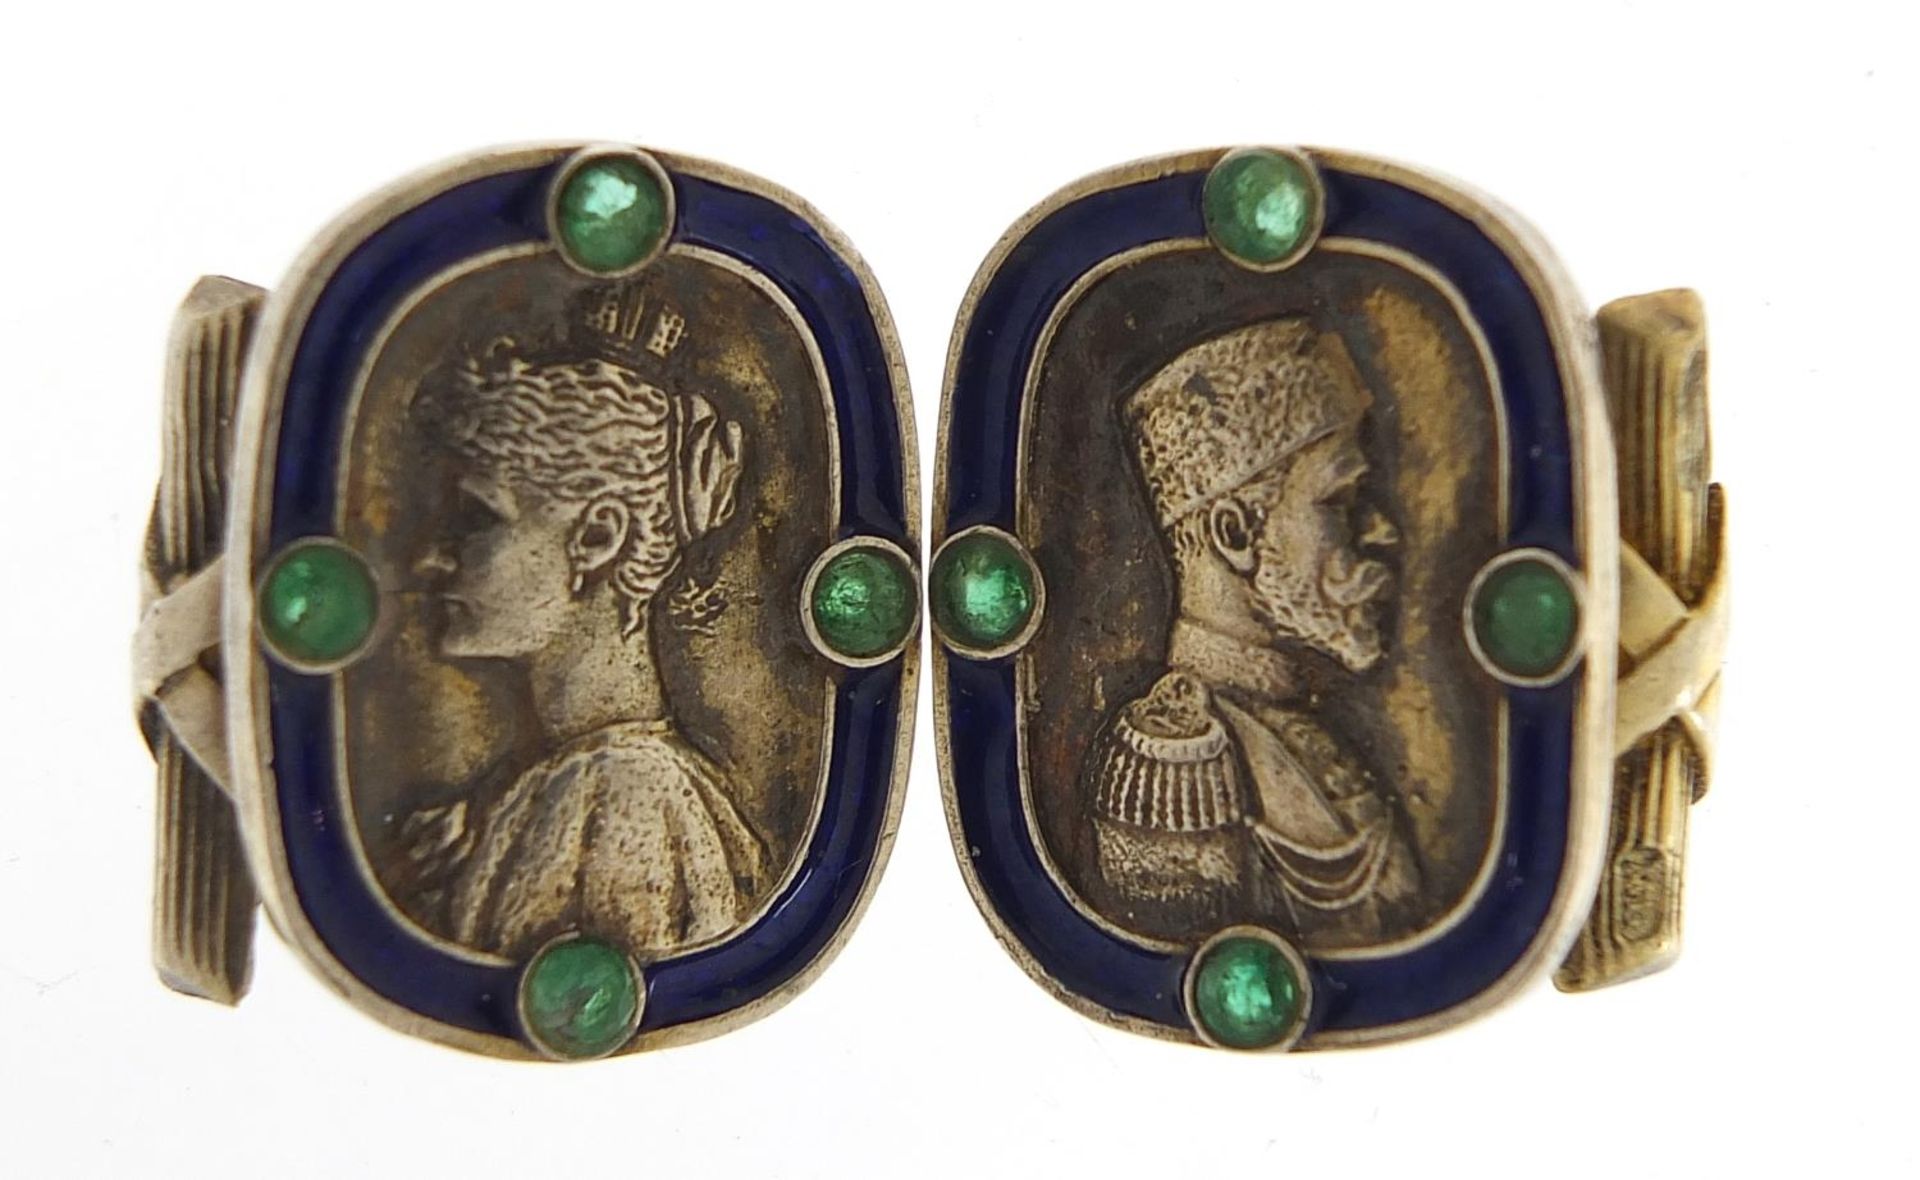 Pair of silver and enamel portrait cufflinks set with green stones, impressed Russian marks, each